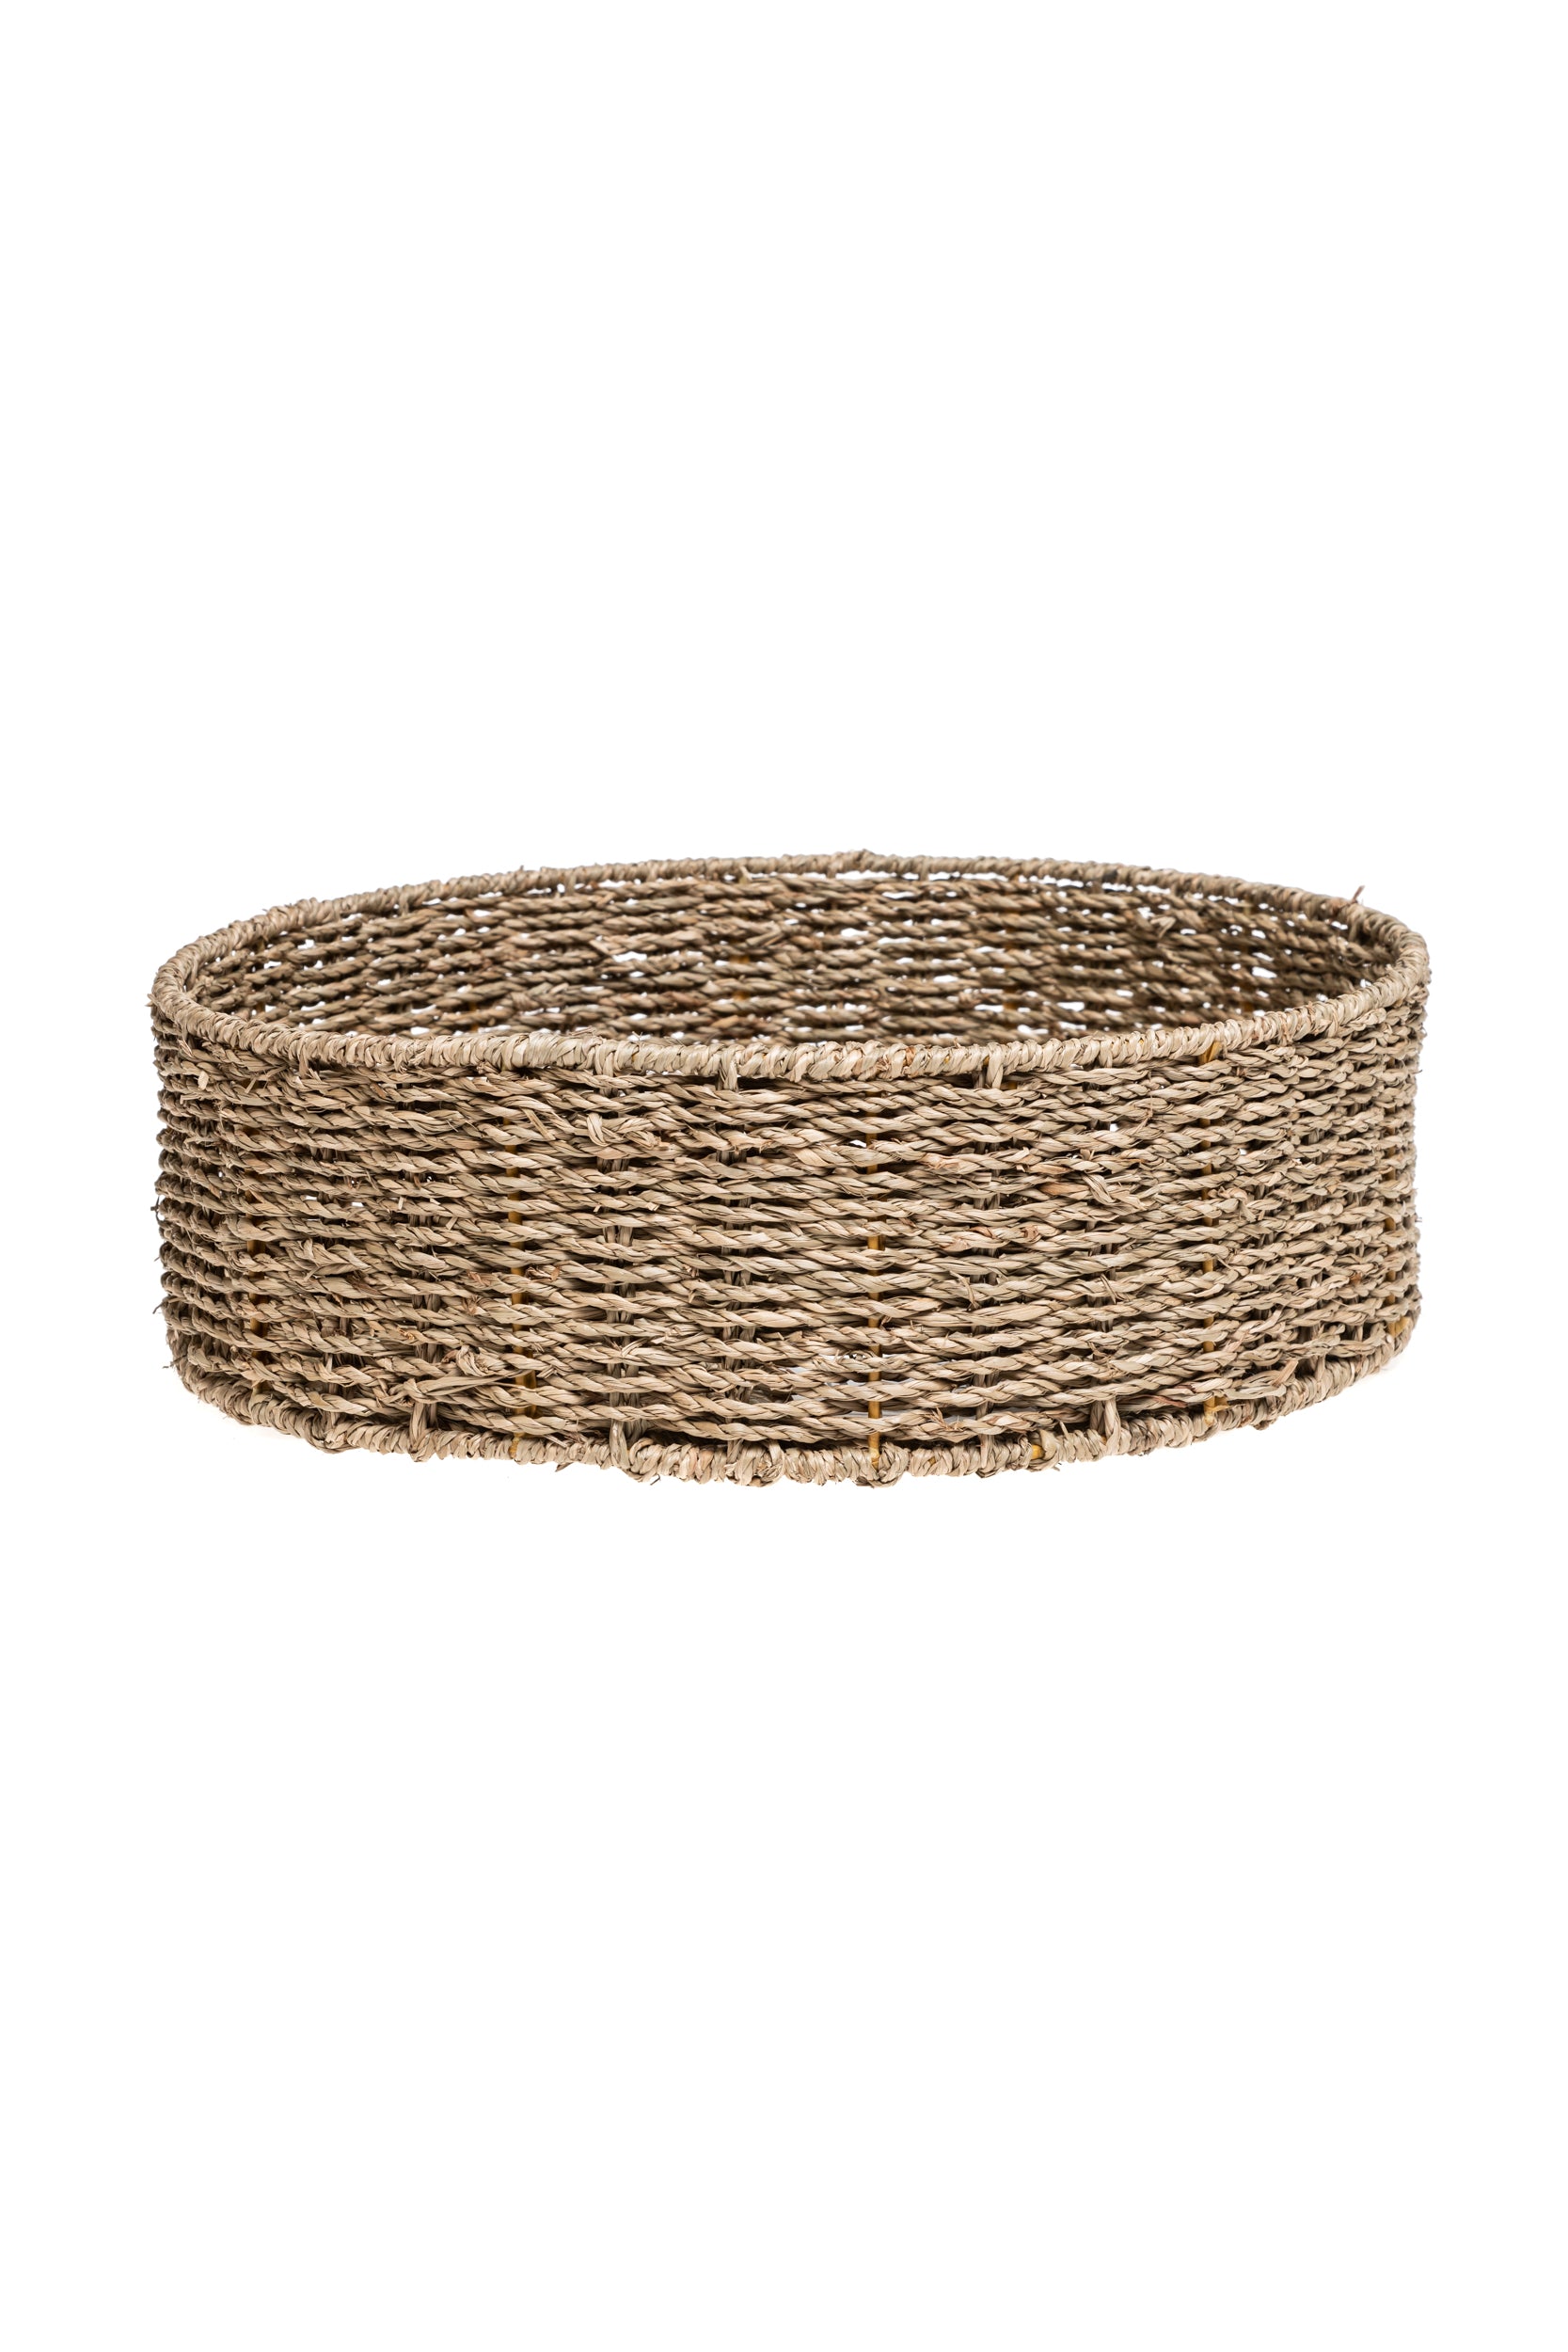 Round basket with frame